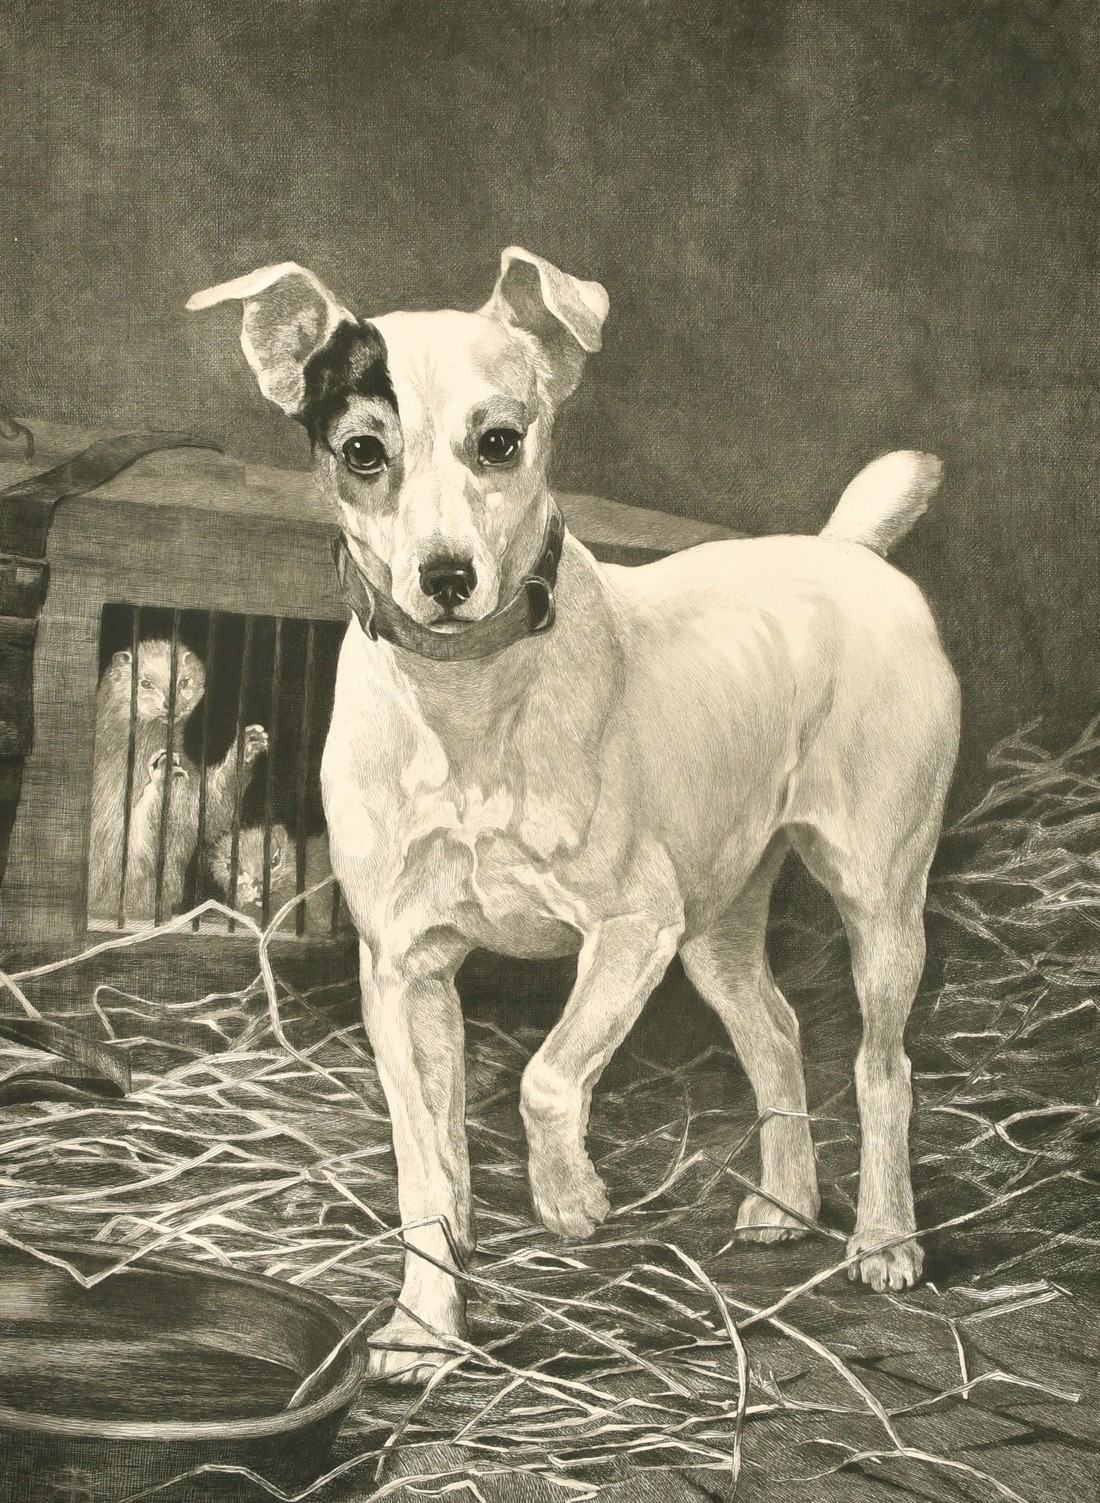 Thomas Blinks, etching of a Jack Russell terrier, 23.5" x 17.75", (60x43cm) and 6 other engravings